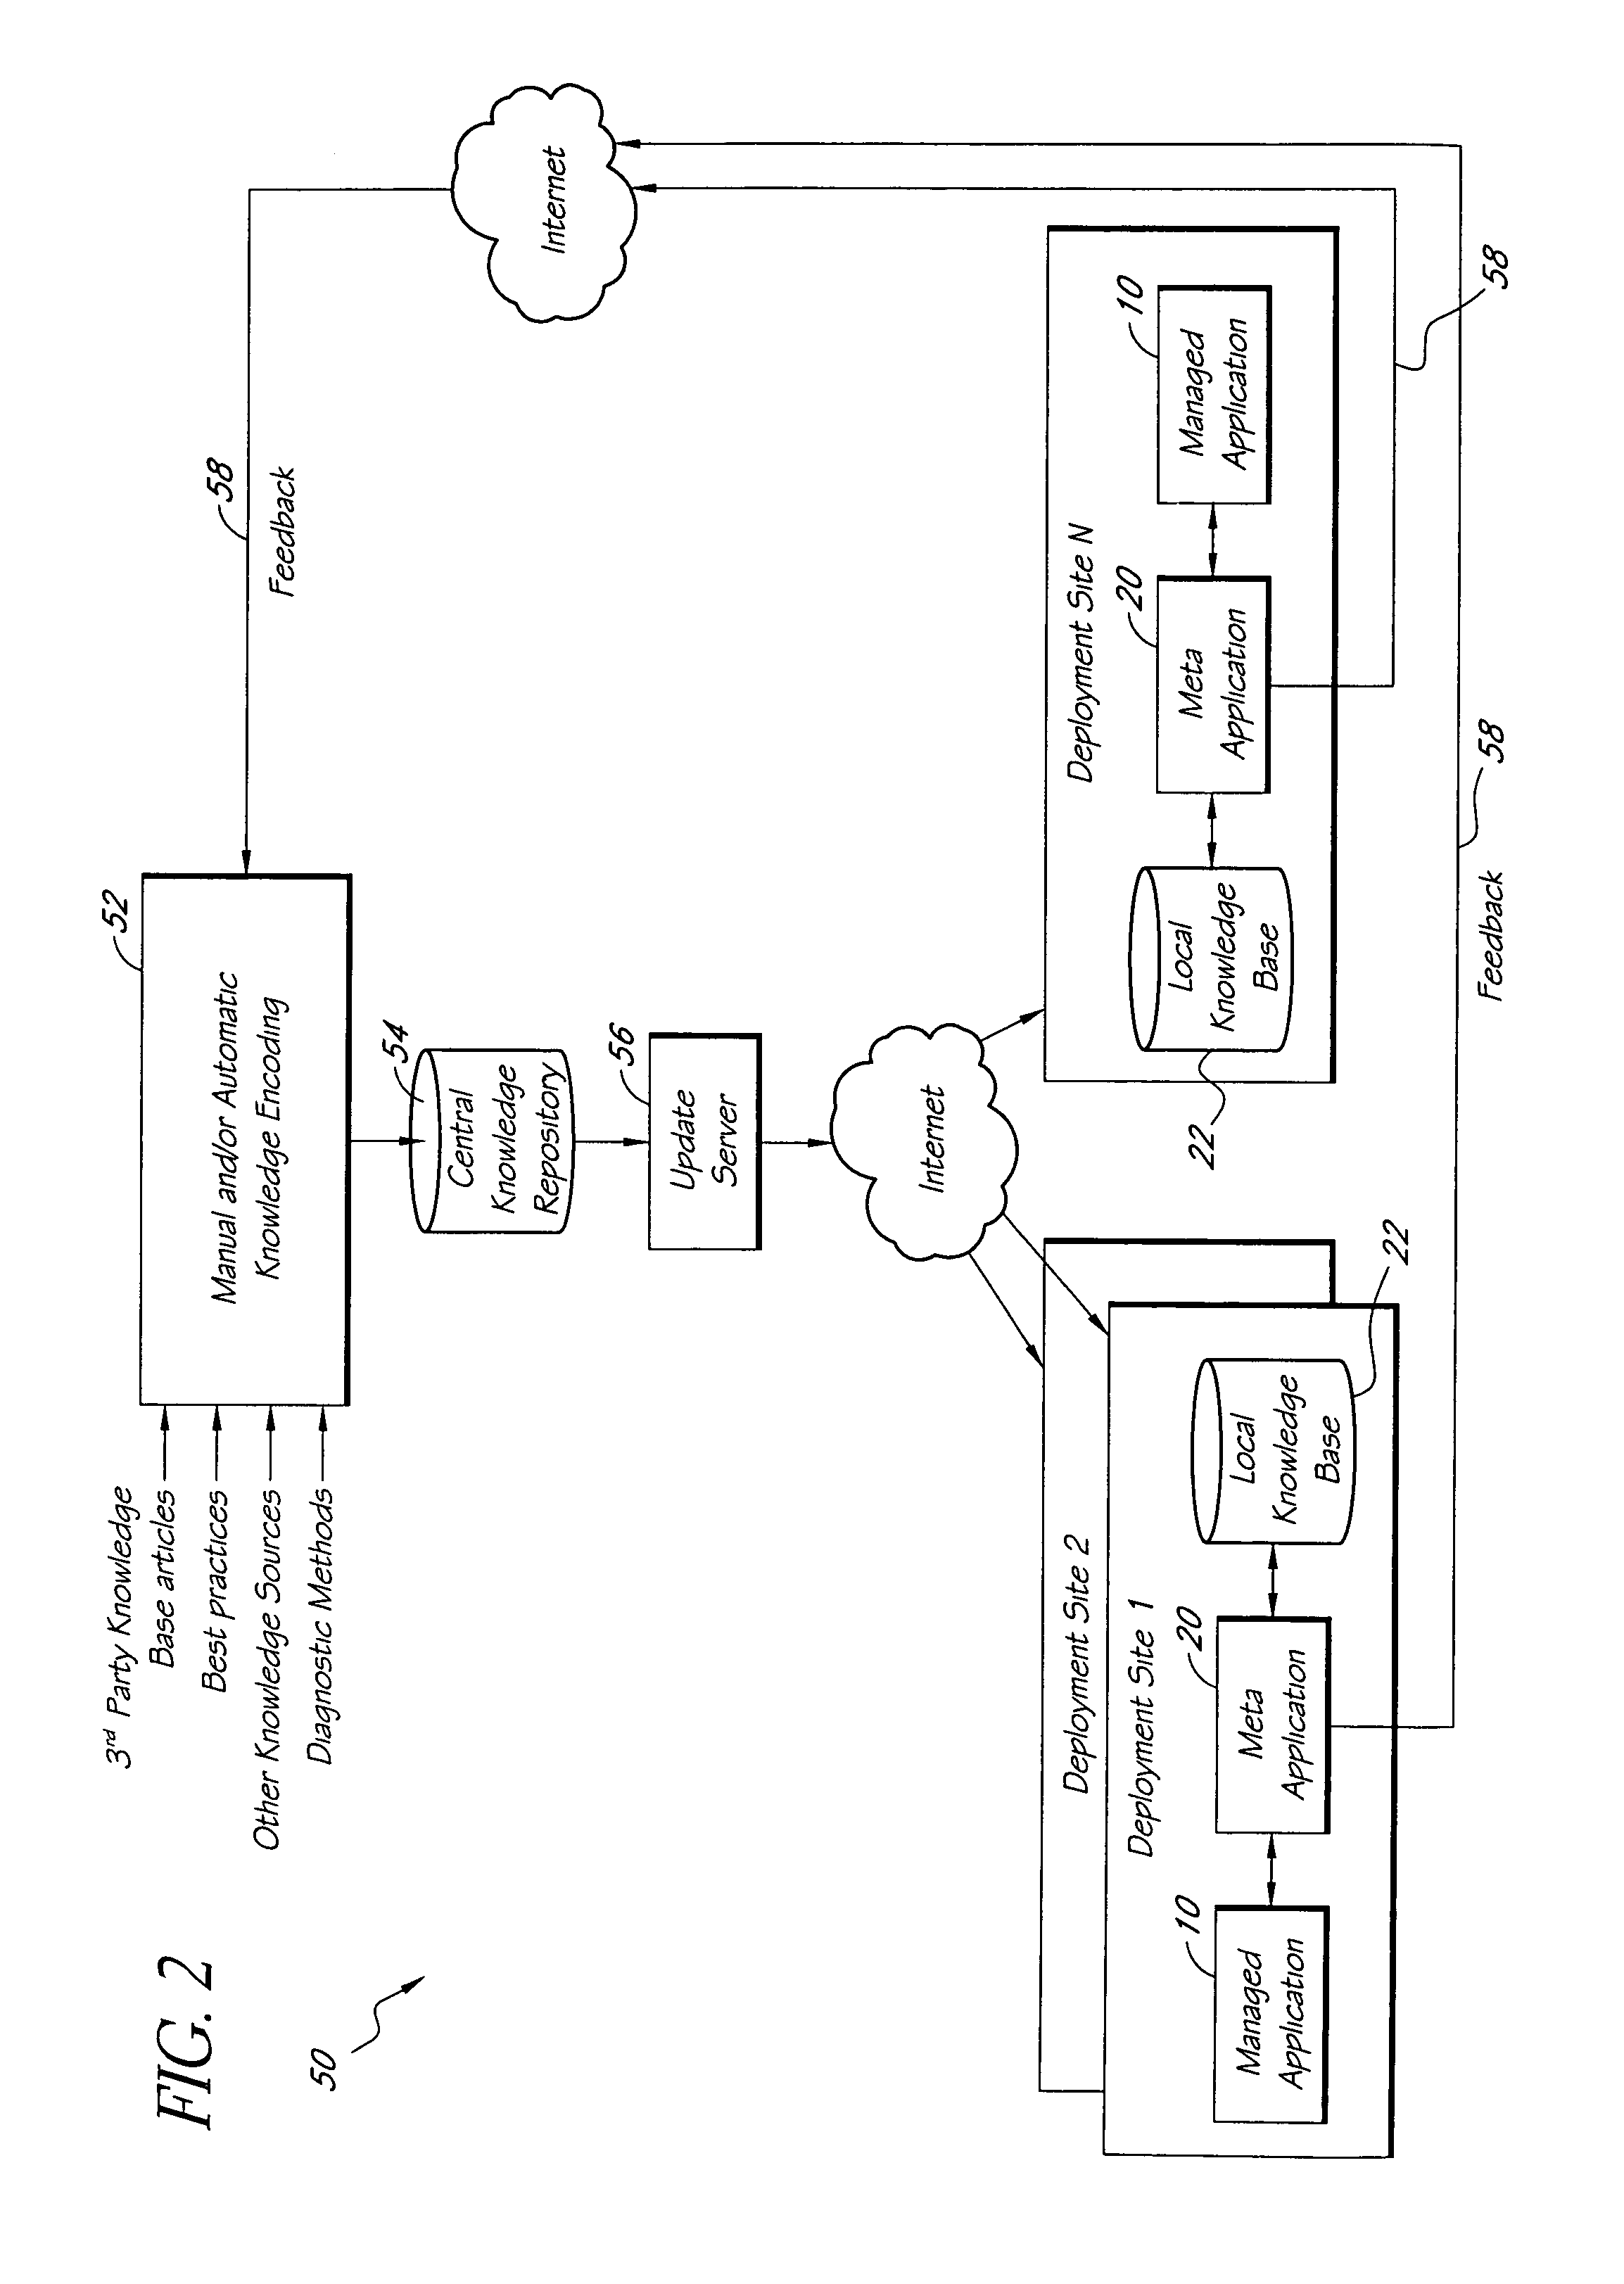 Systems and methods for encoding knowledge for automated management of software application deployments